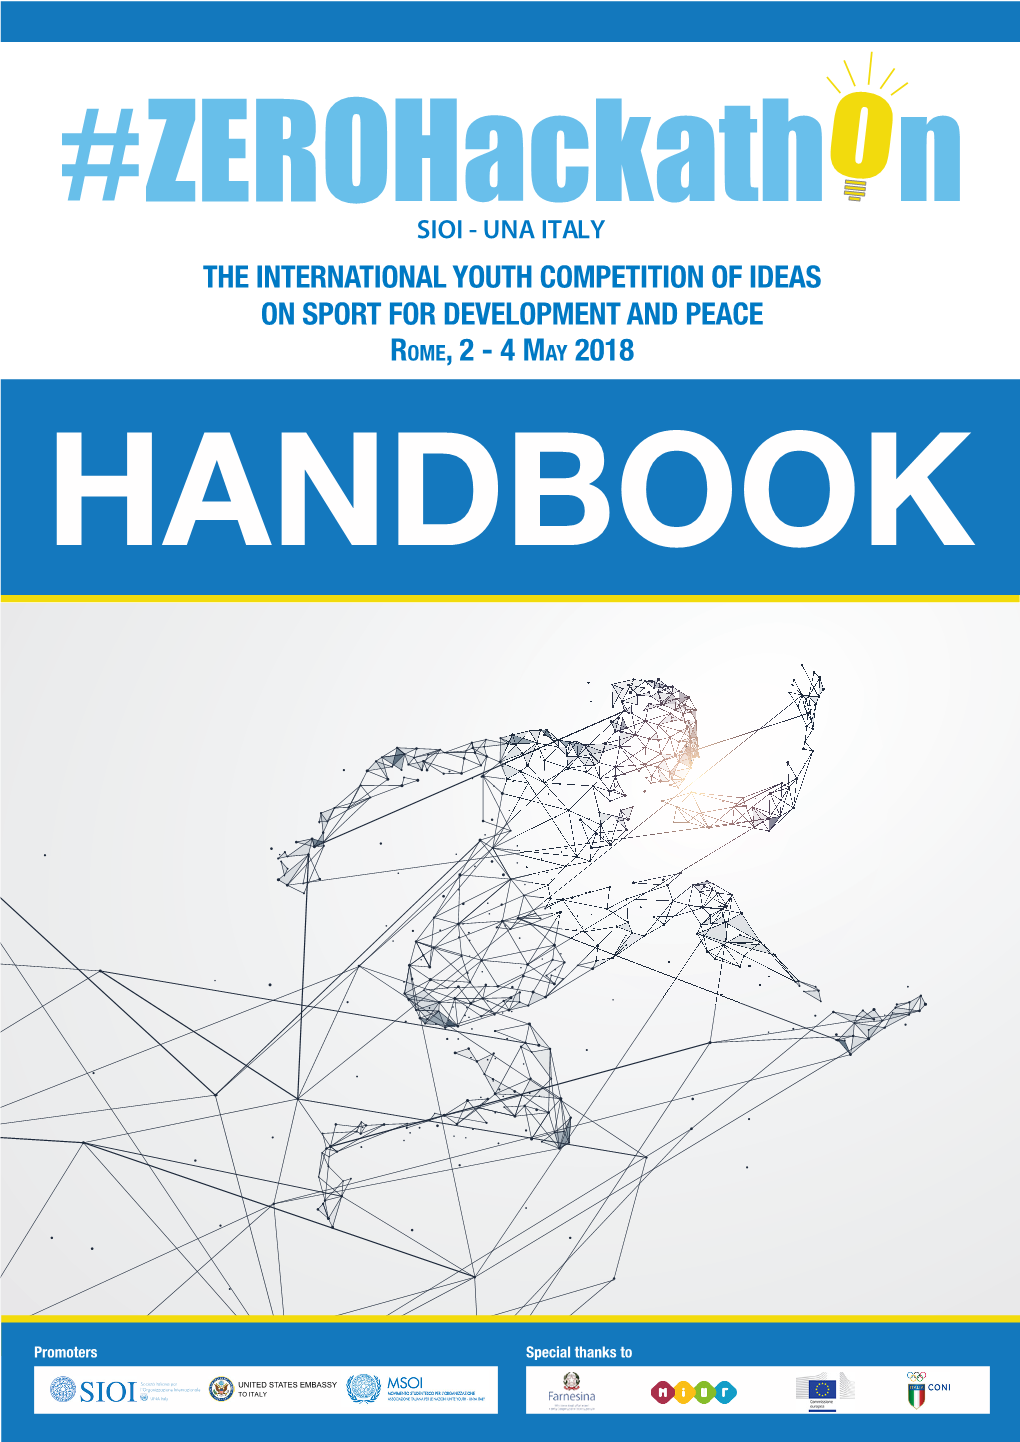 The International Youth Competition of Ideas on Sport for Development and Peace Rome, 2 - 4 May 2018 Handbook